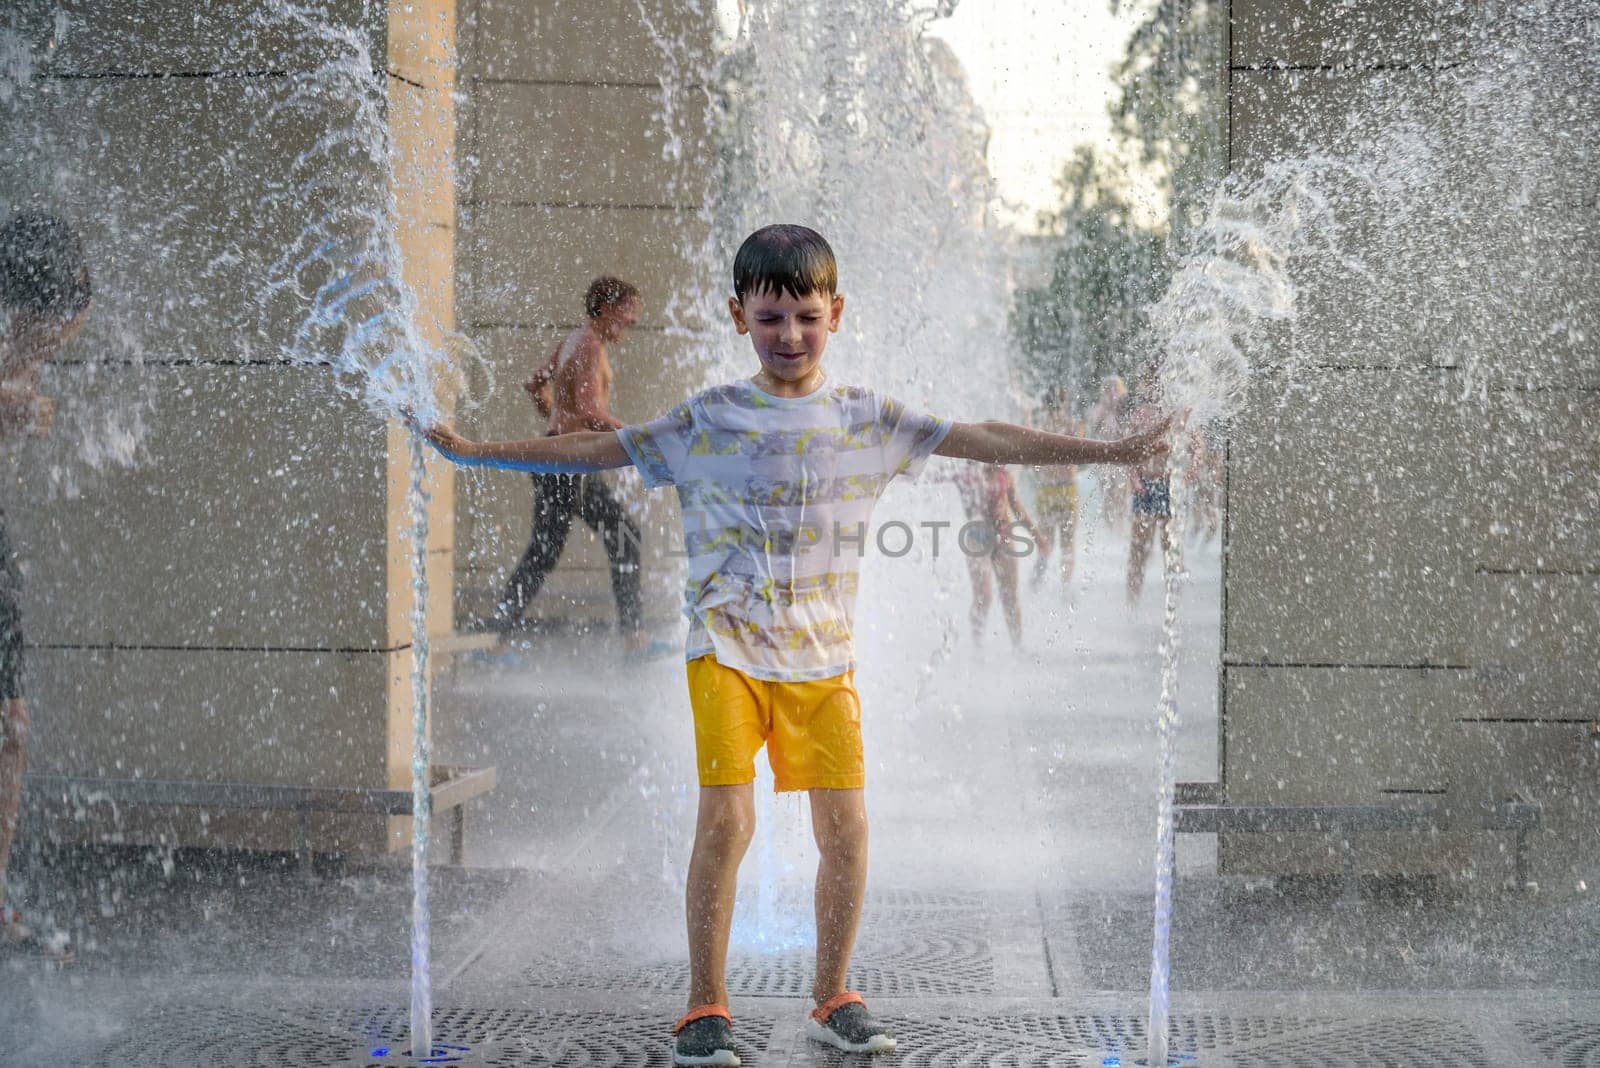 Boy having fun in water fountains. Child playing with a city fountain on hot summer day. Happy kids having fun in fountain. Summer weather. Active leisure, lifestyle and vacation by Kobysh